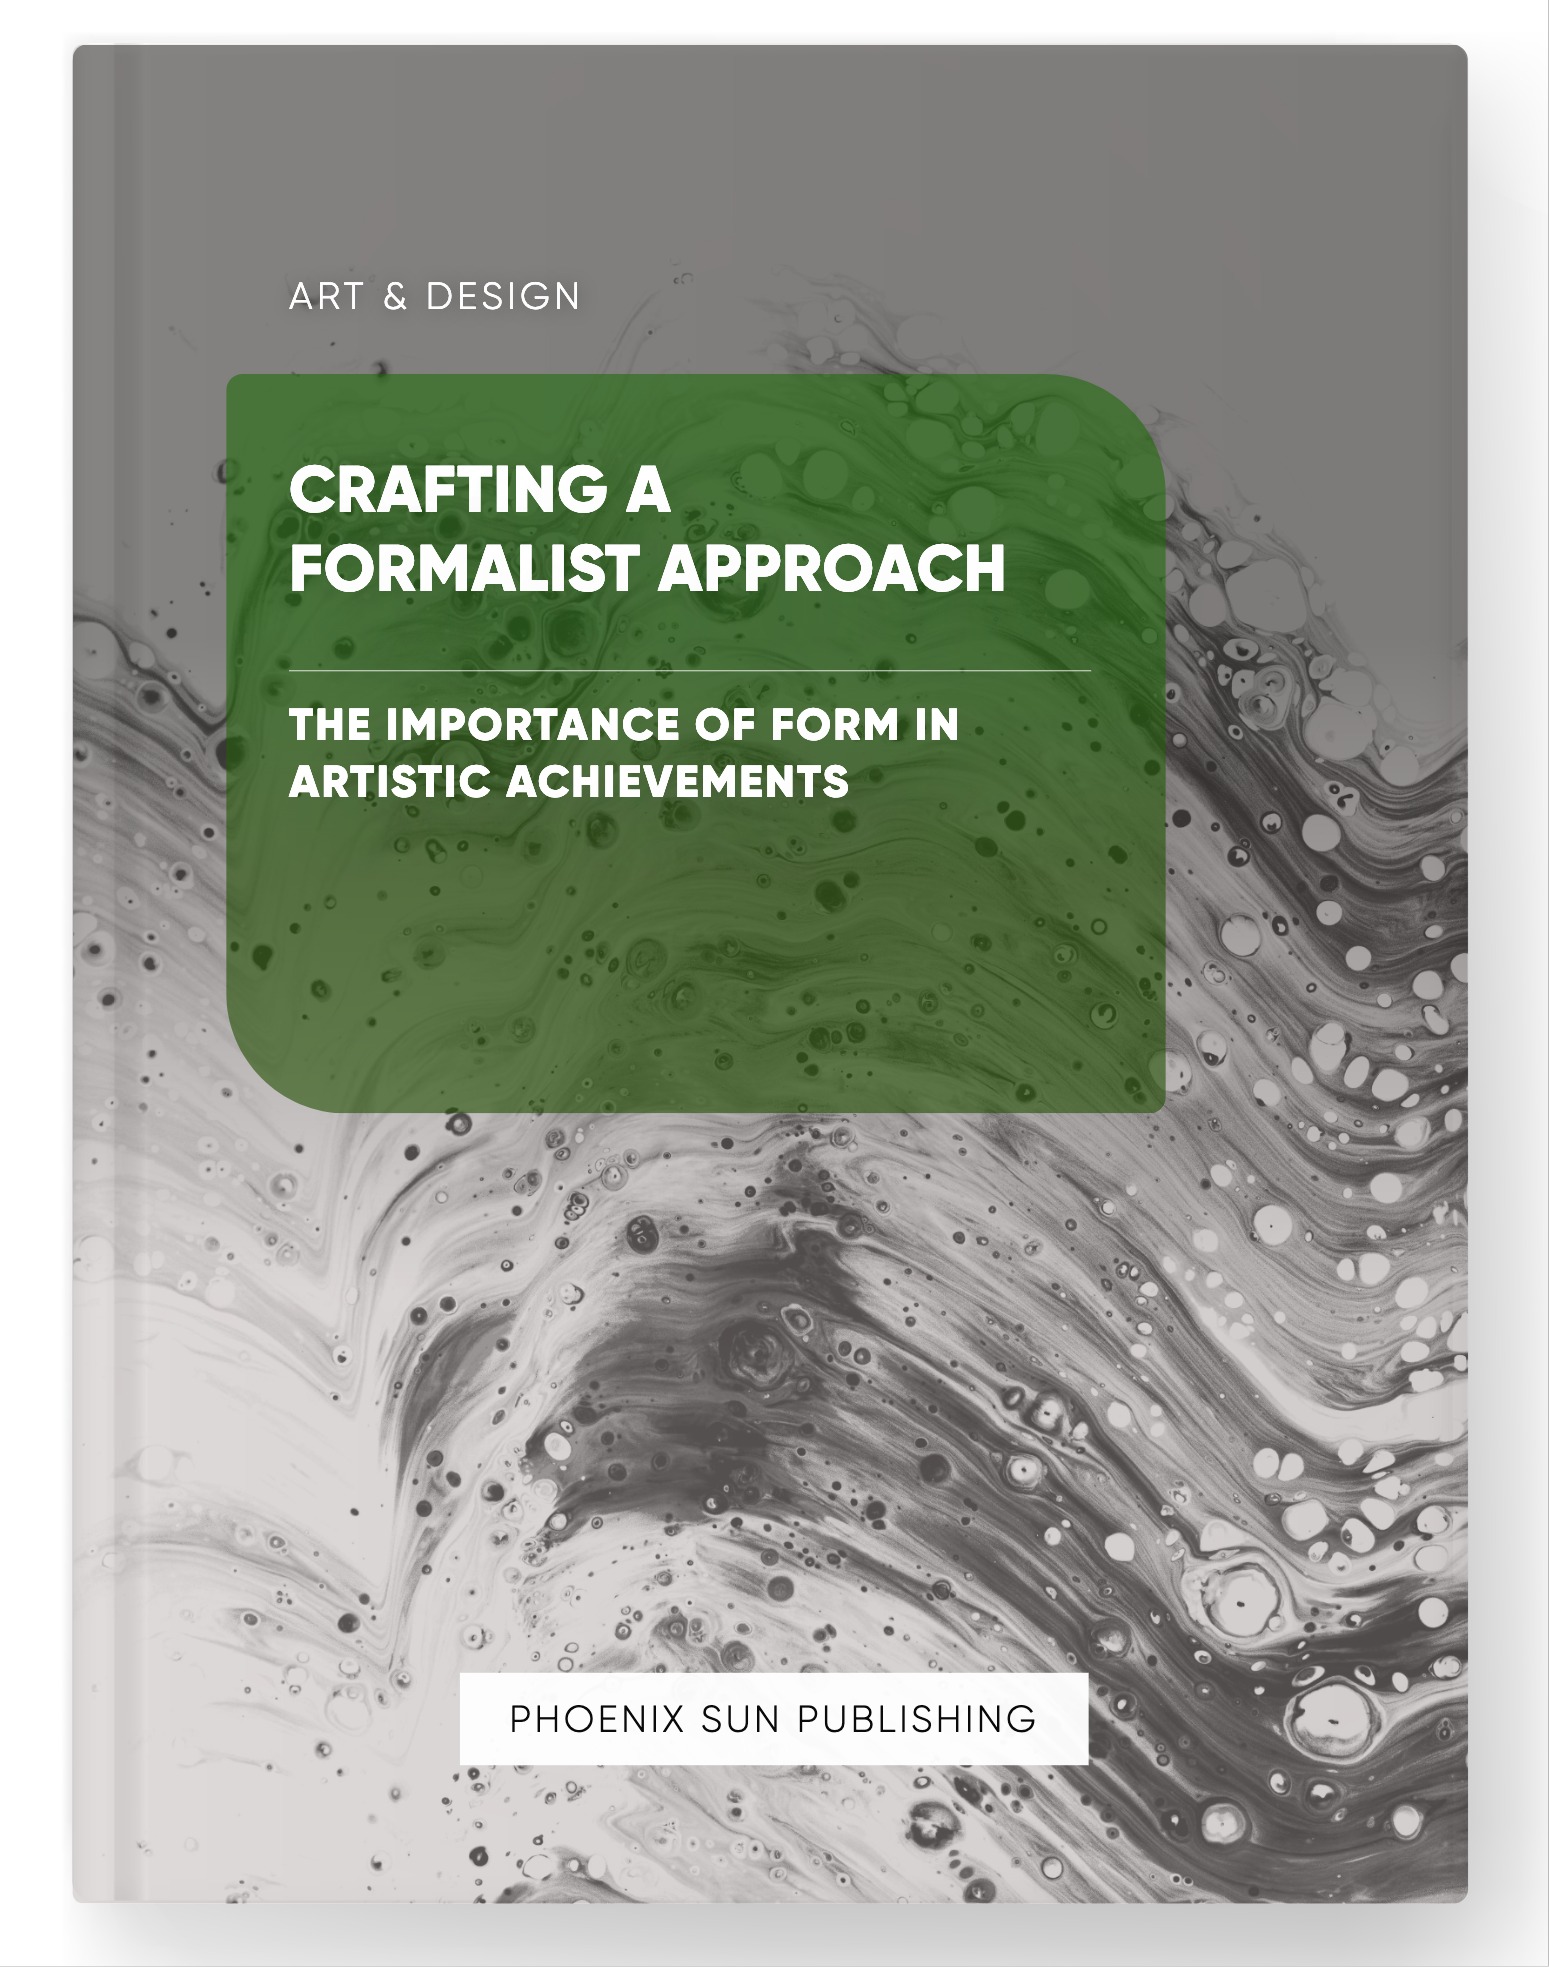 Crafting a Formalist Approach – The Importance of Form in Artistic Achievements